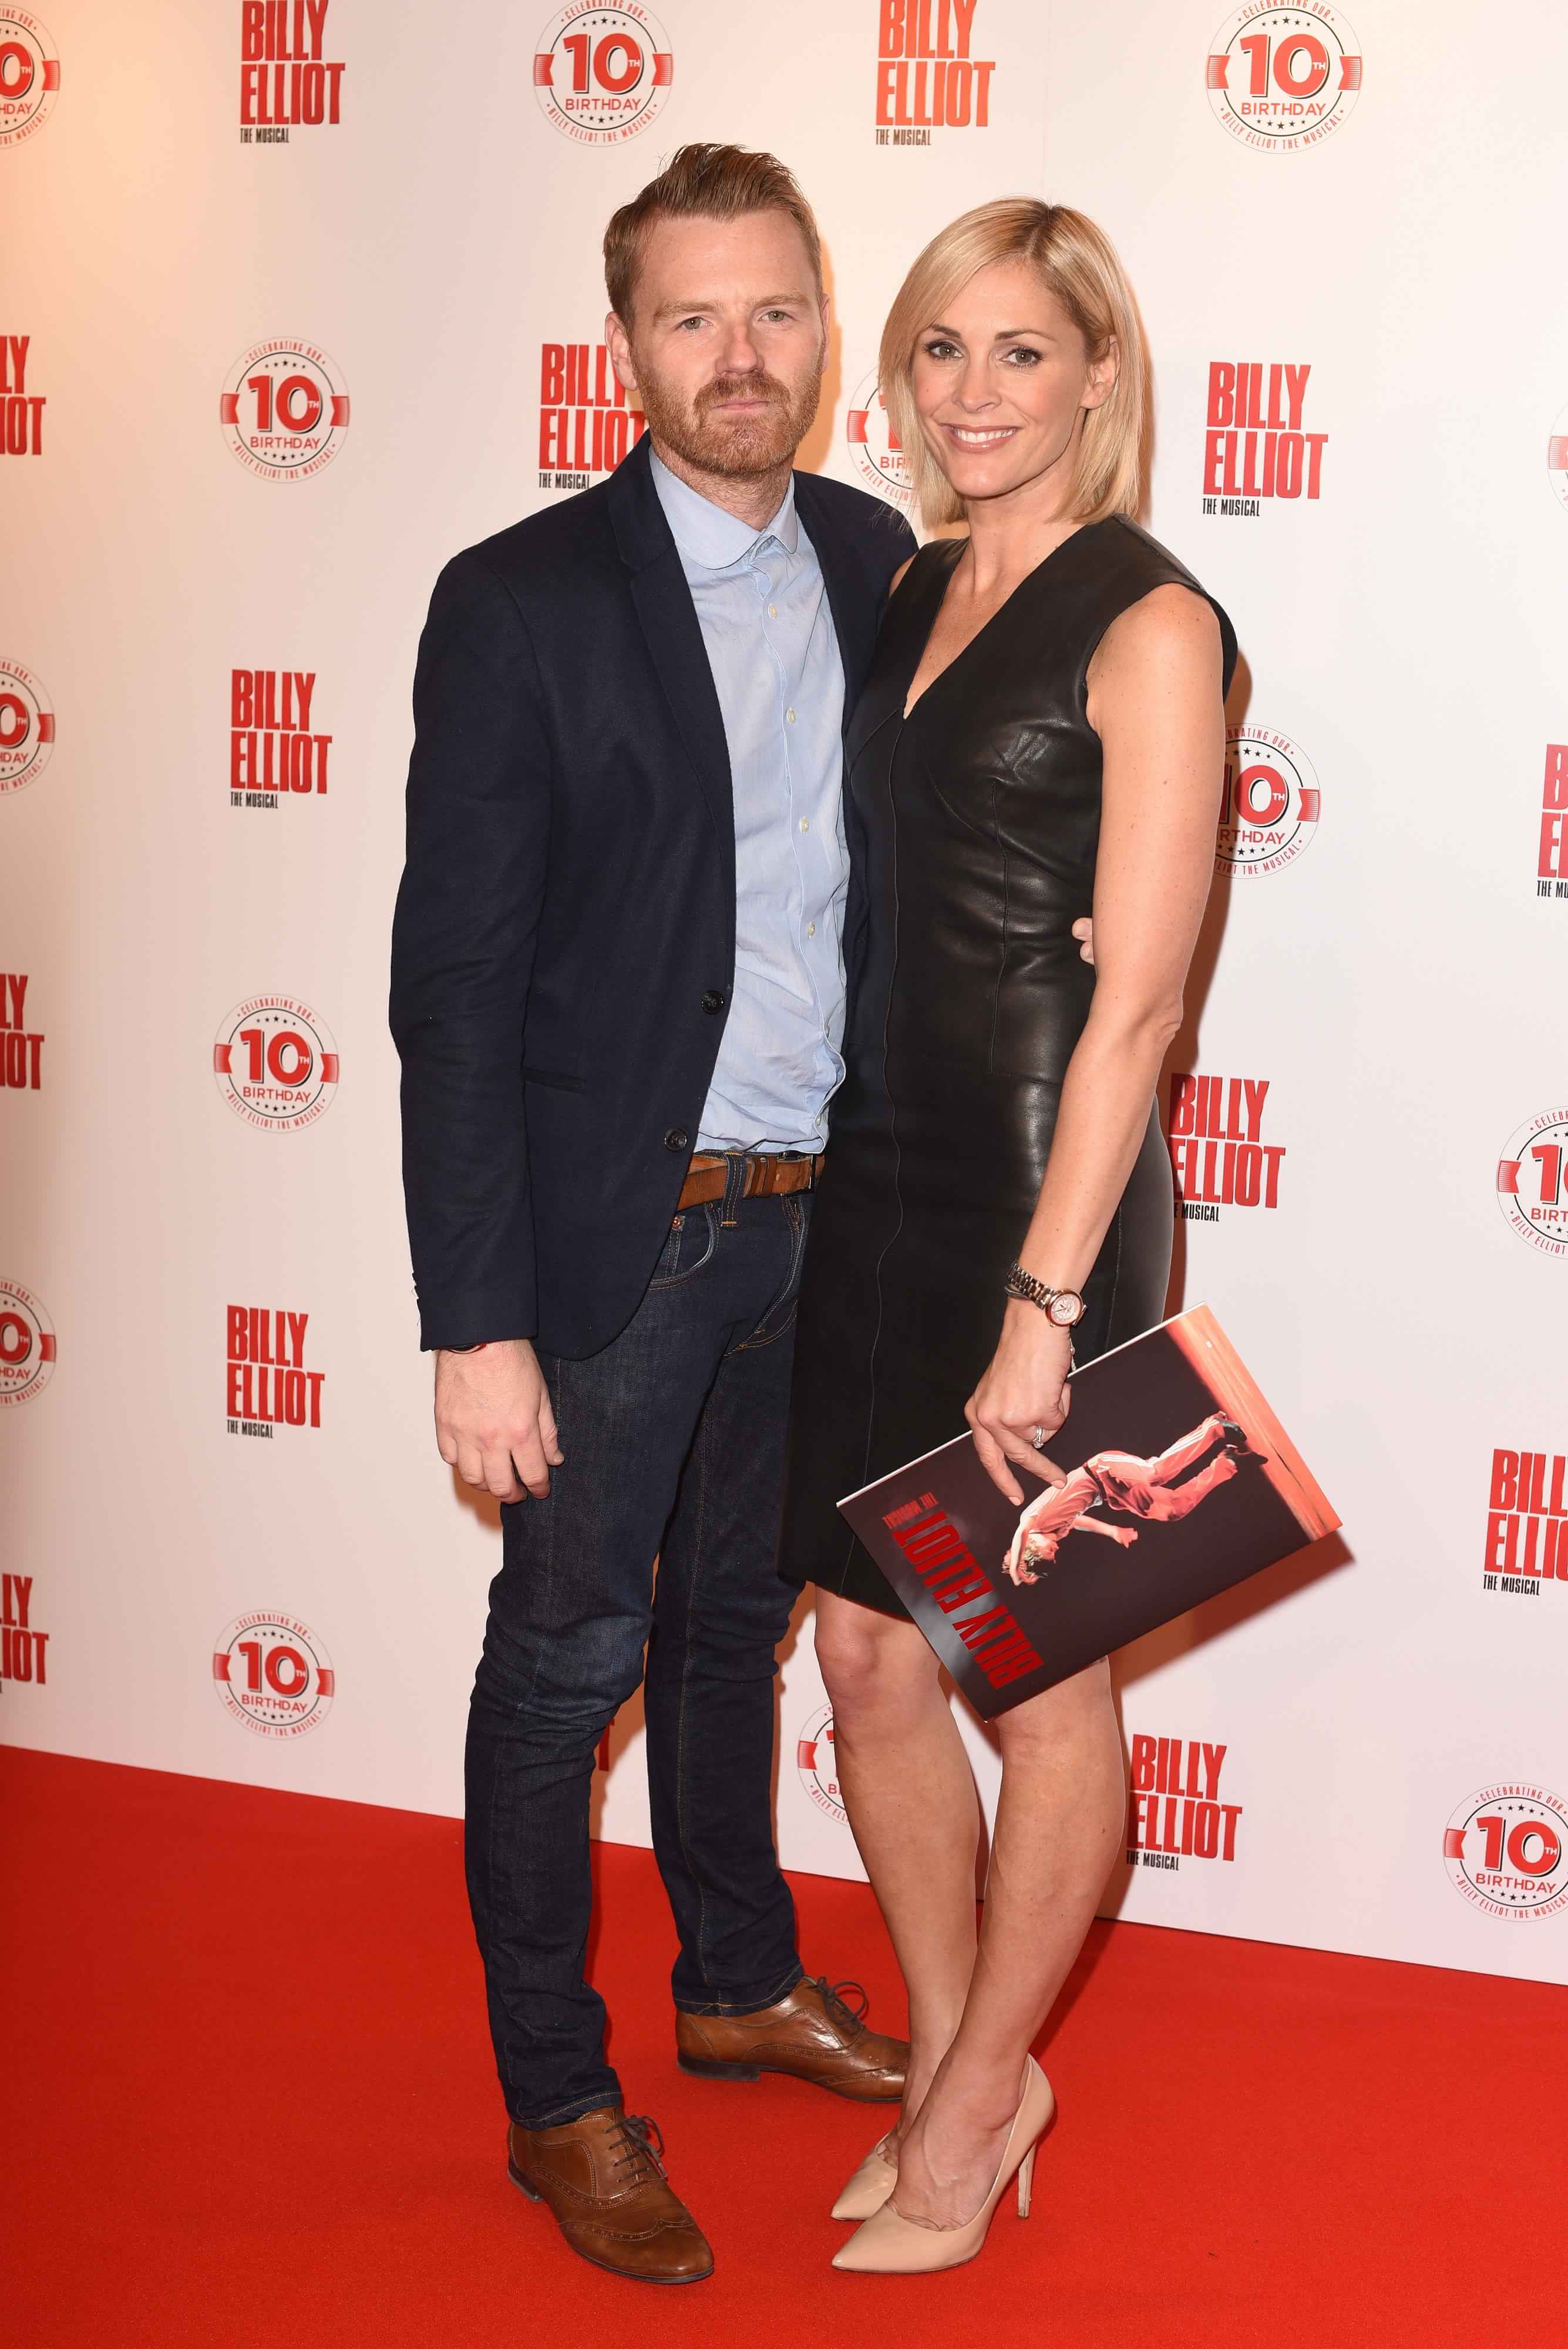 Jenni Falconer attends Billy Elliot The Musical 10th Anniversary